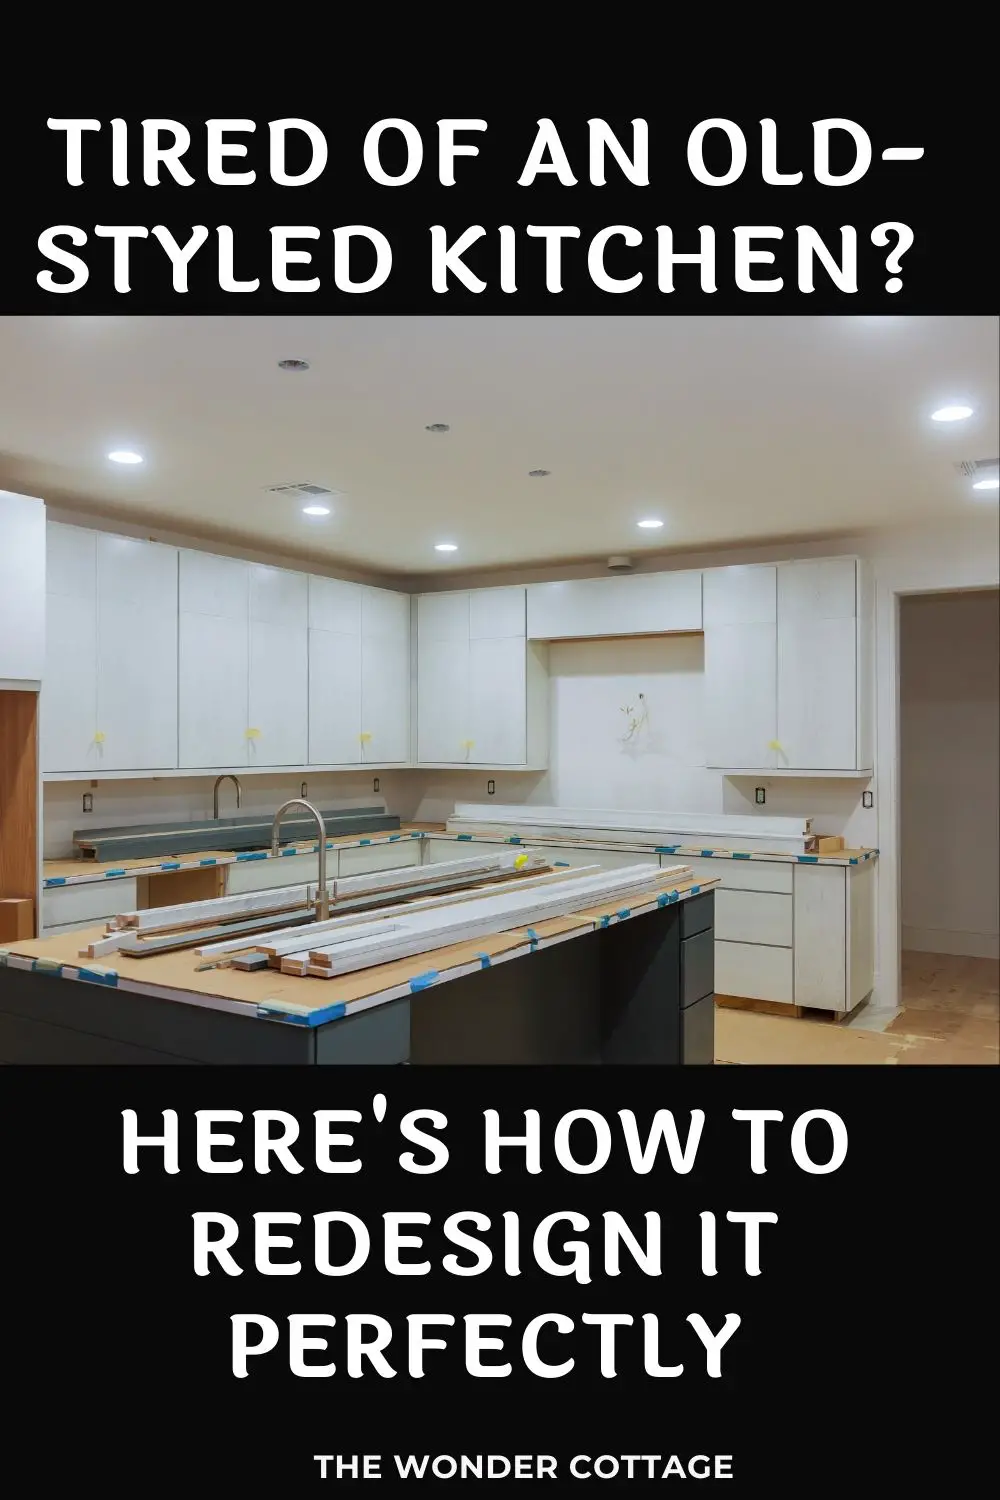 How To Redesign An Old-Styled Kitchen